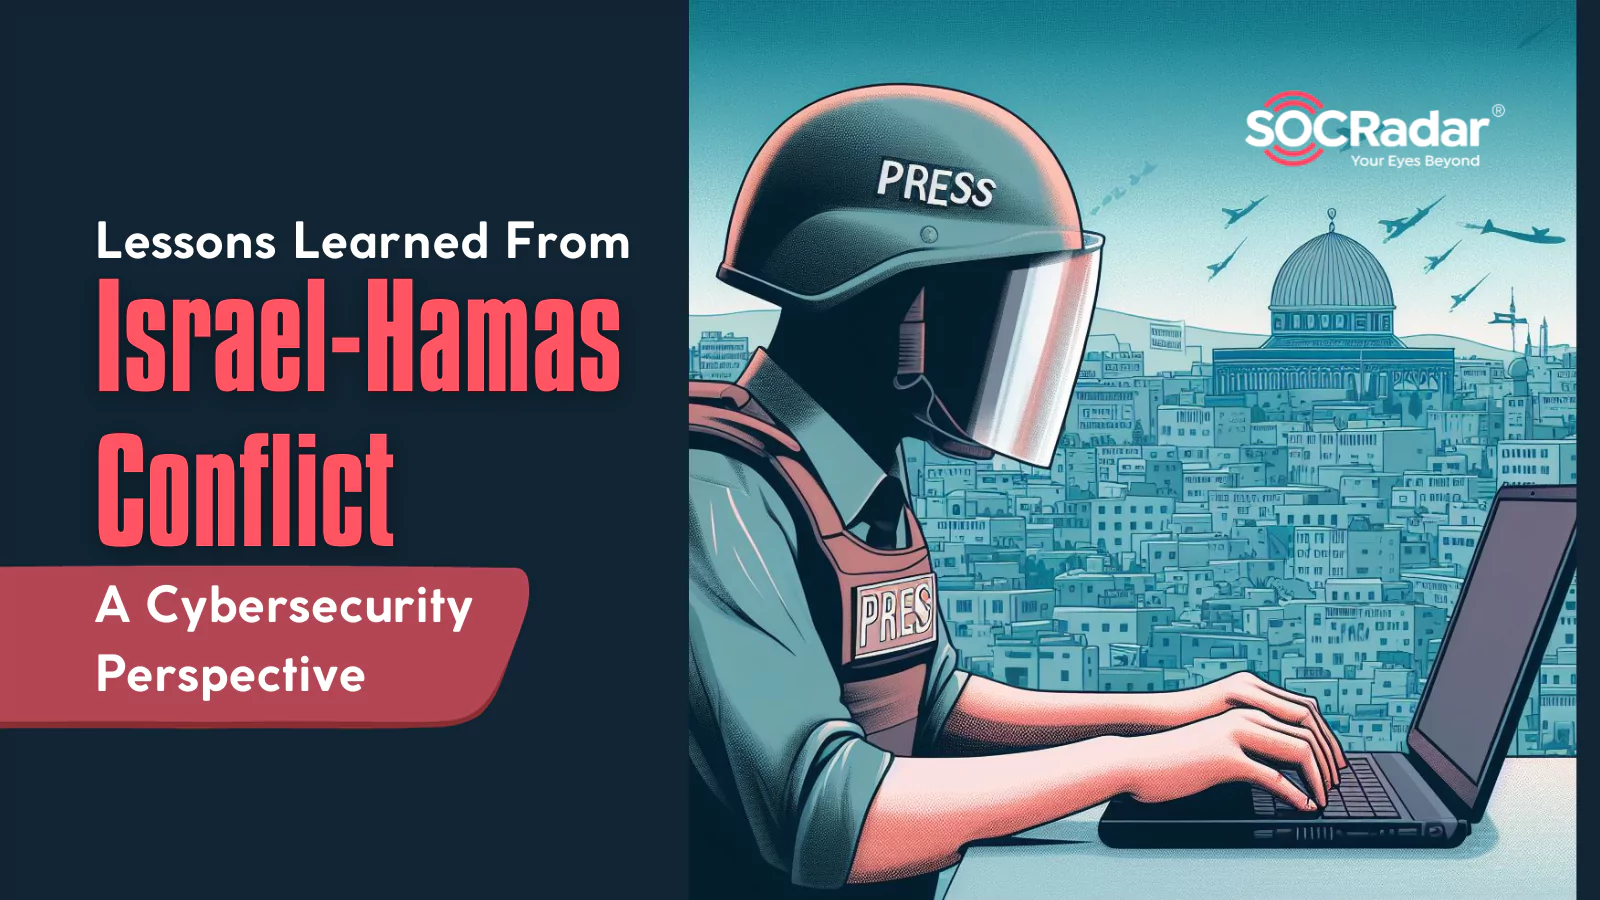 SOCRadar® Cyber Intelligence Inc. | Lessons Learned From Israel-Hamas Conflict: A Cybersecurity Perspective